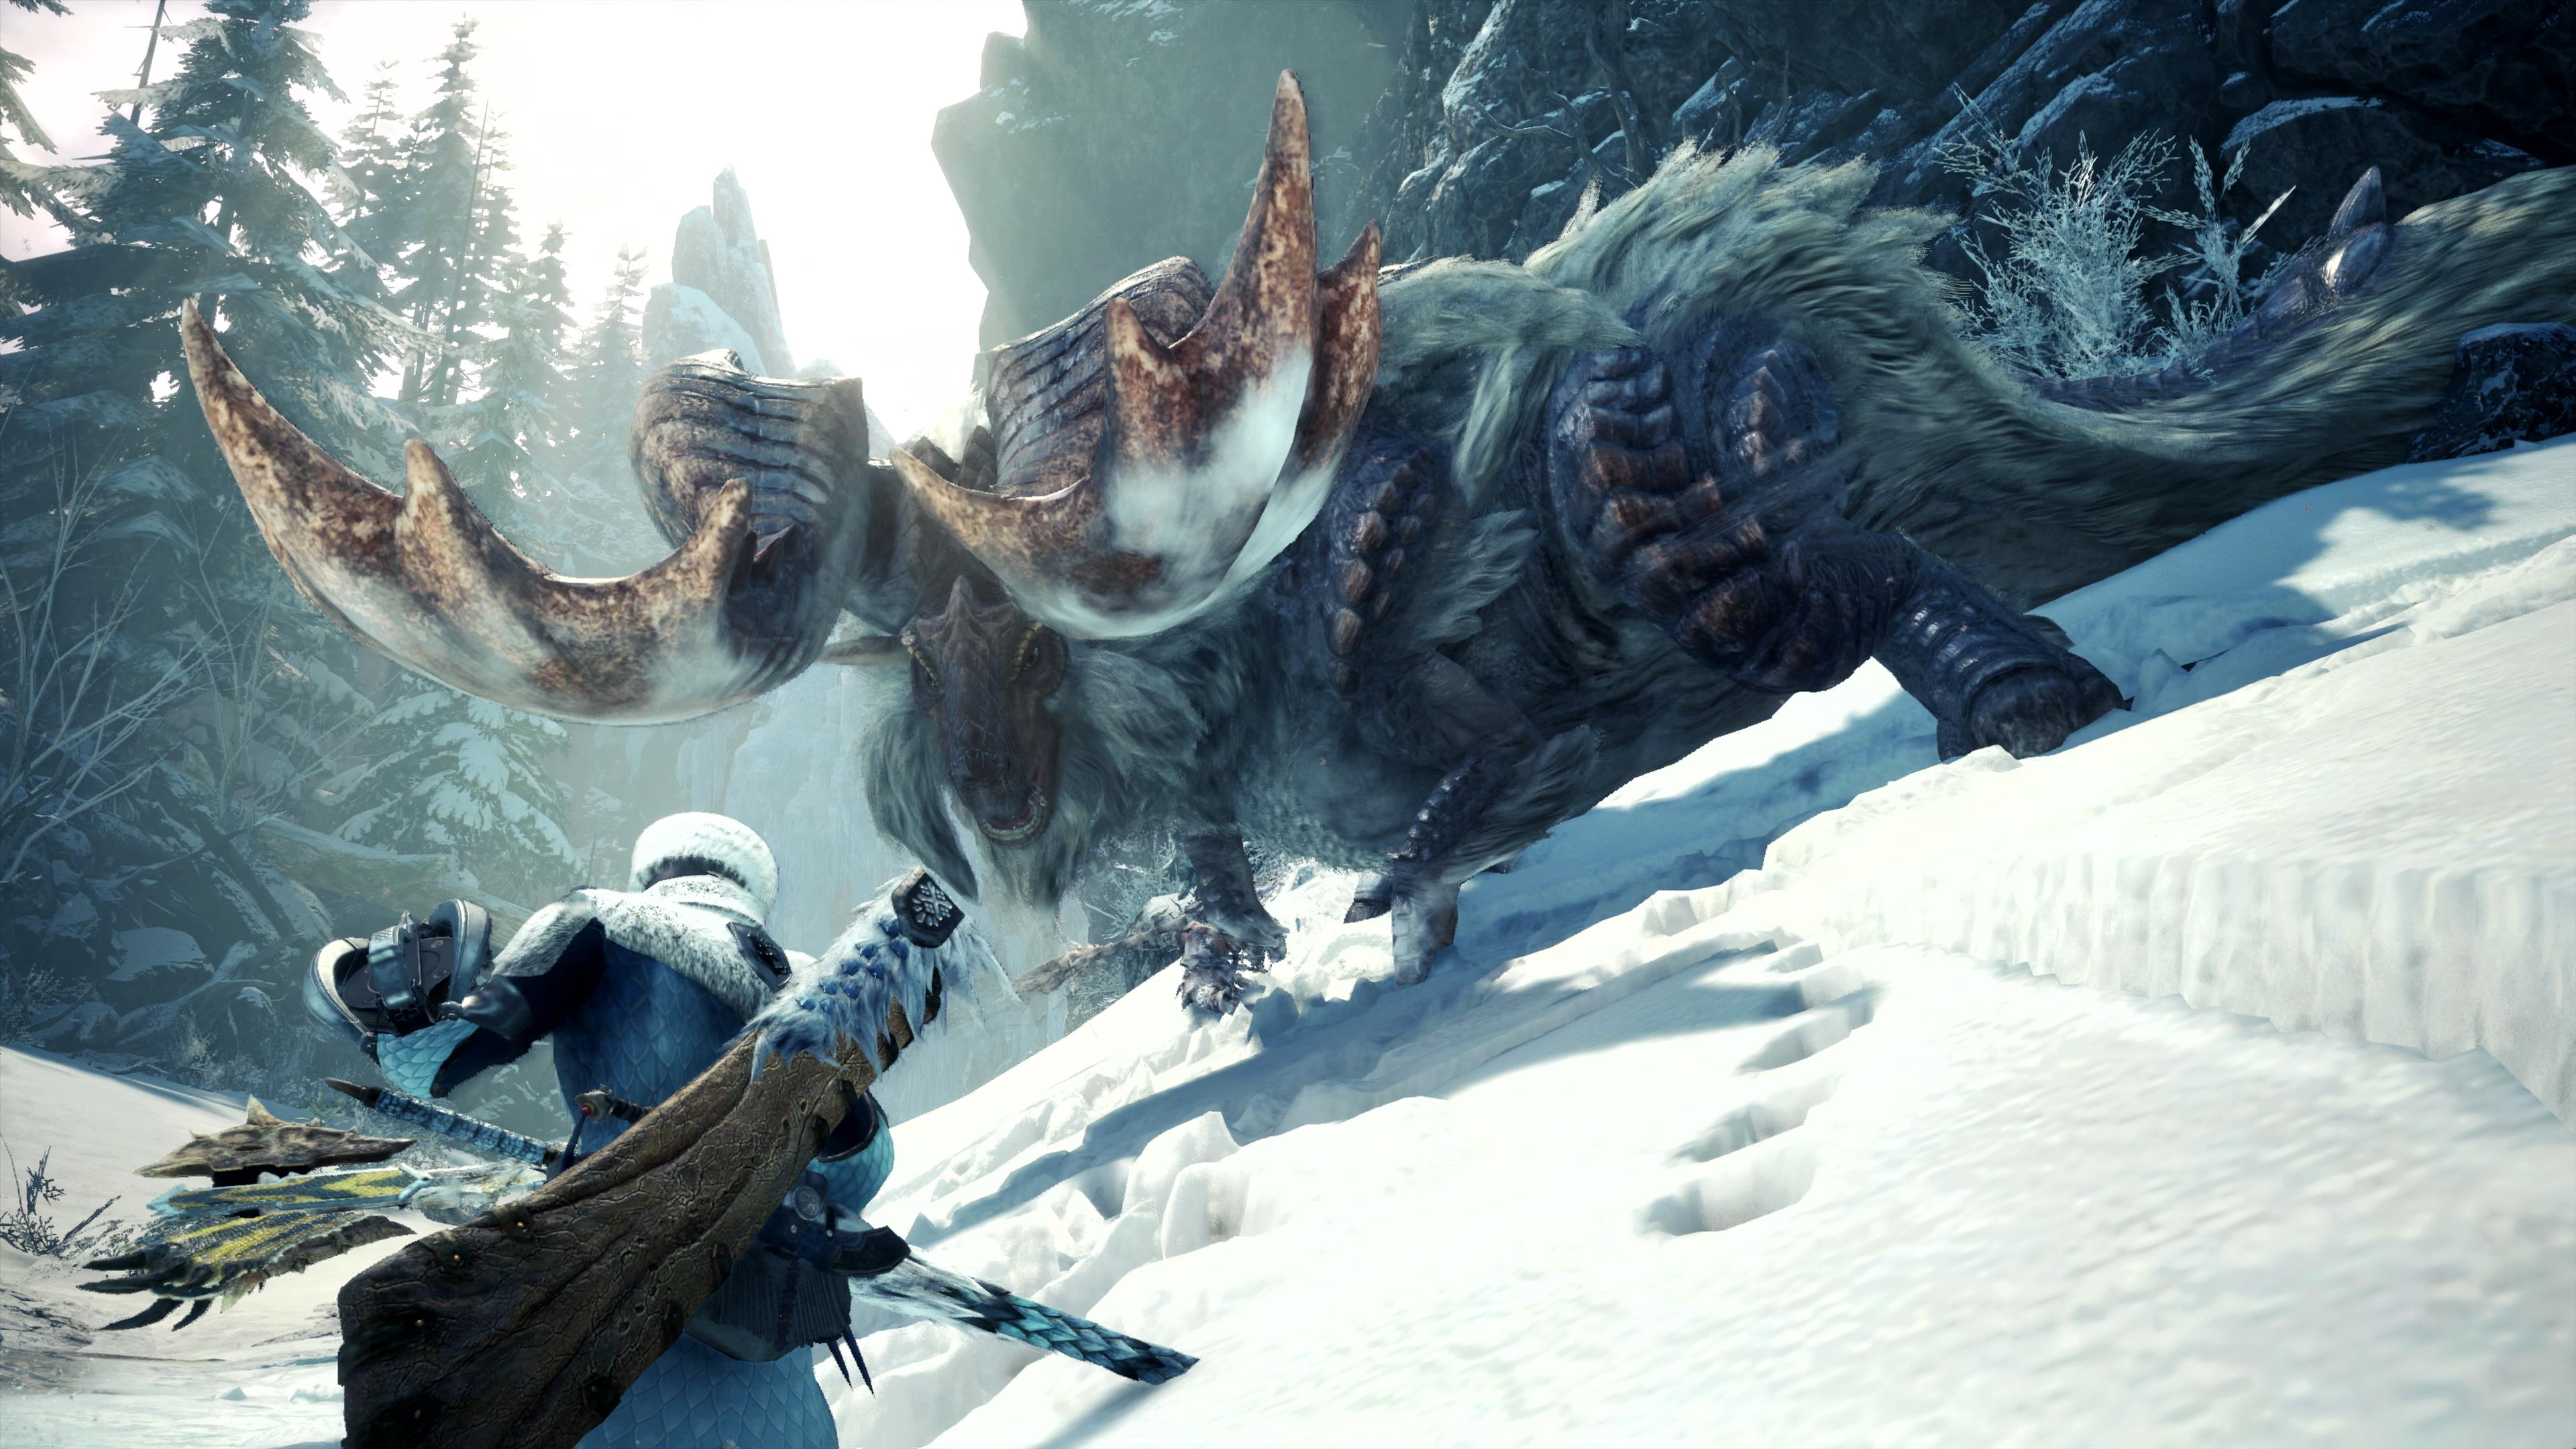 Image for Monster Hunter World: Iceborne free beta weekend kicks off today on PS4